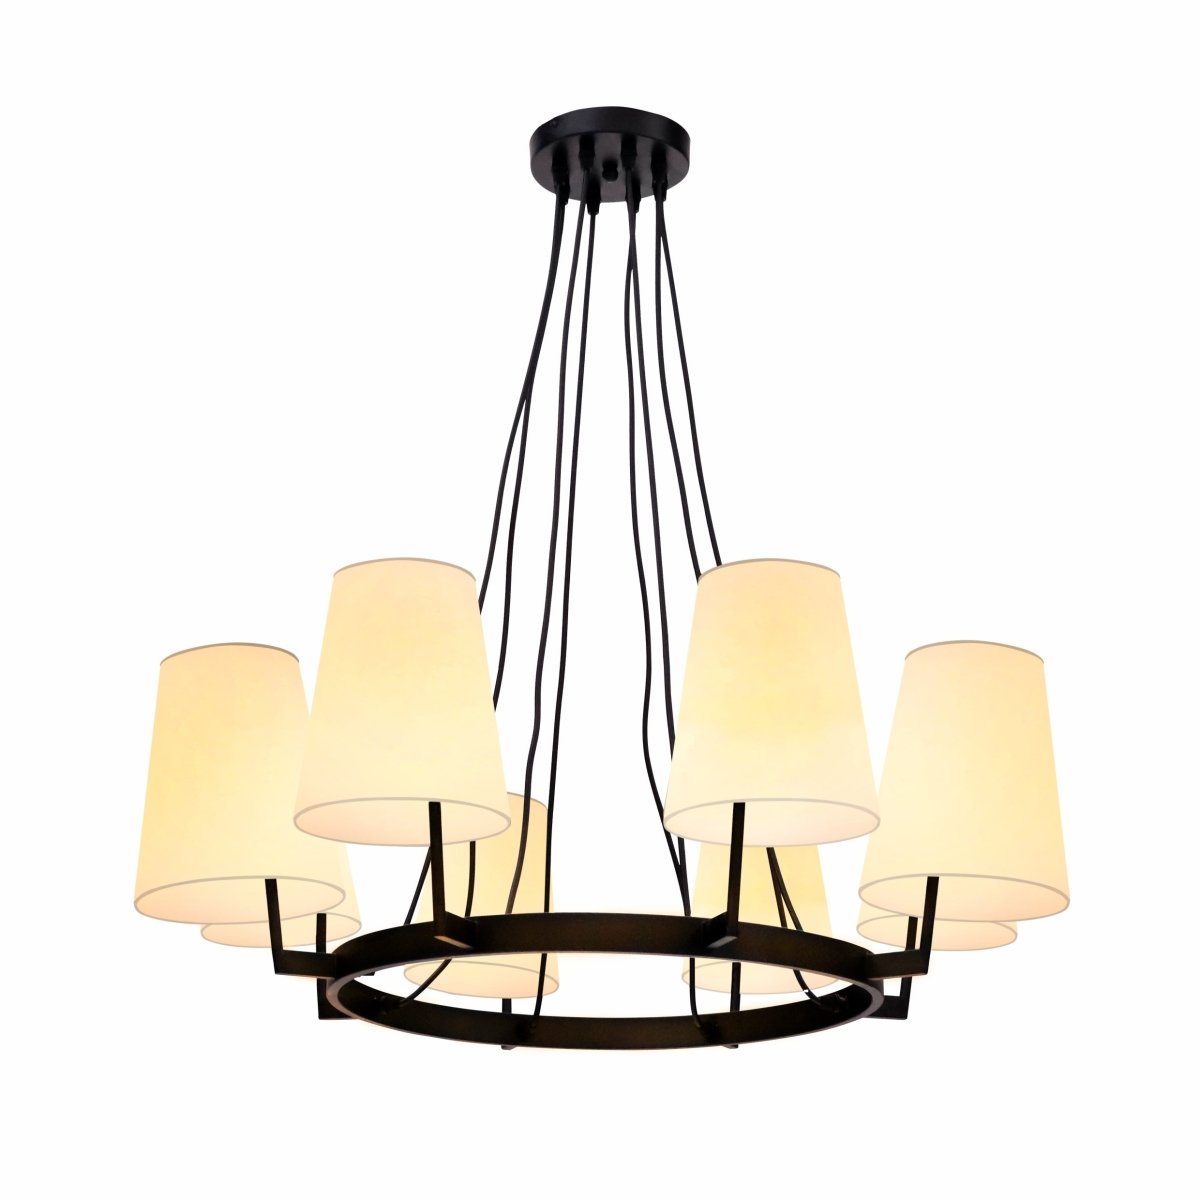 Main image of Beige Fabric Shade Black Metal Body Chandelier with 8xE14 Fitting | TEKLED 159-17556